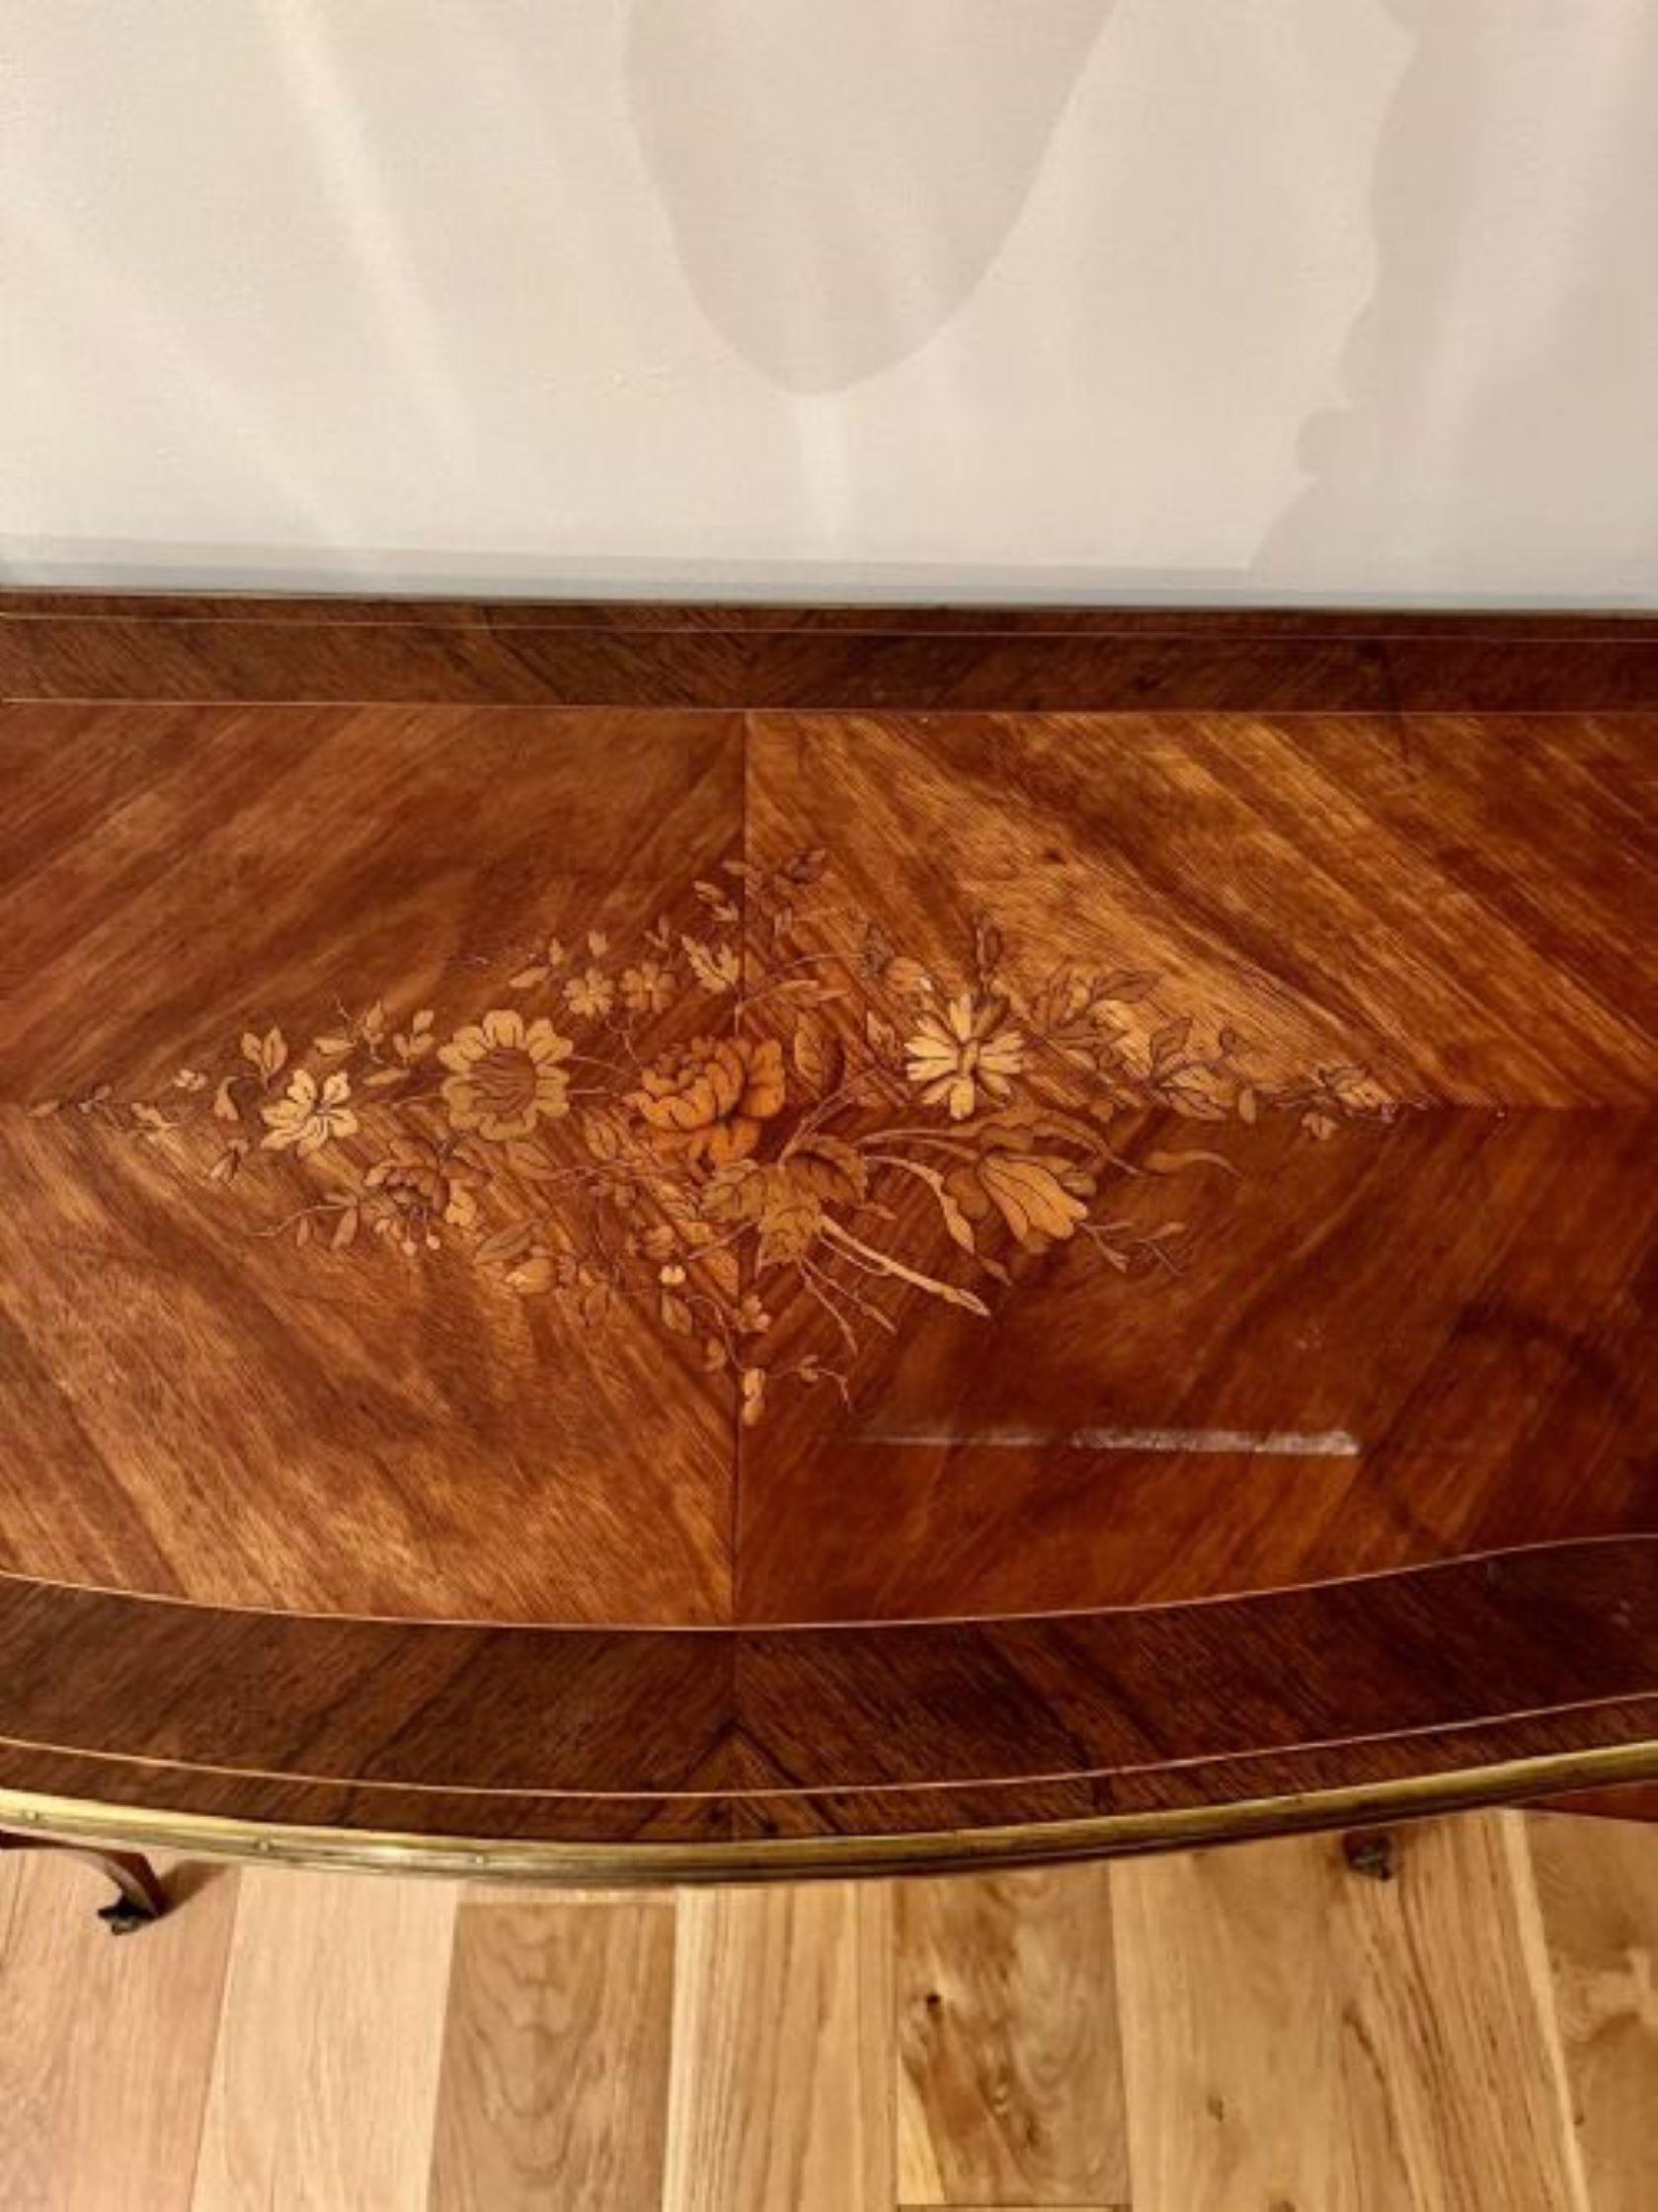 Antique French quality kingwood marquetry inlaid ormolu mounted card table having a quality kingwood marquetry inlaid serpentine shaped swizzle top with a brass edge opening to reveal a green baize interior above a marquetry inlaid frieze standing